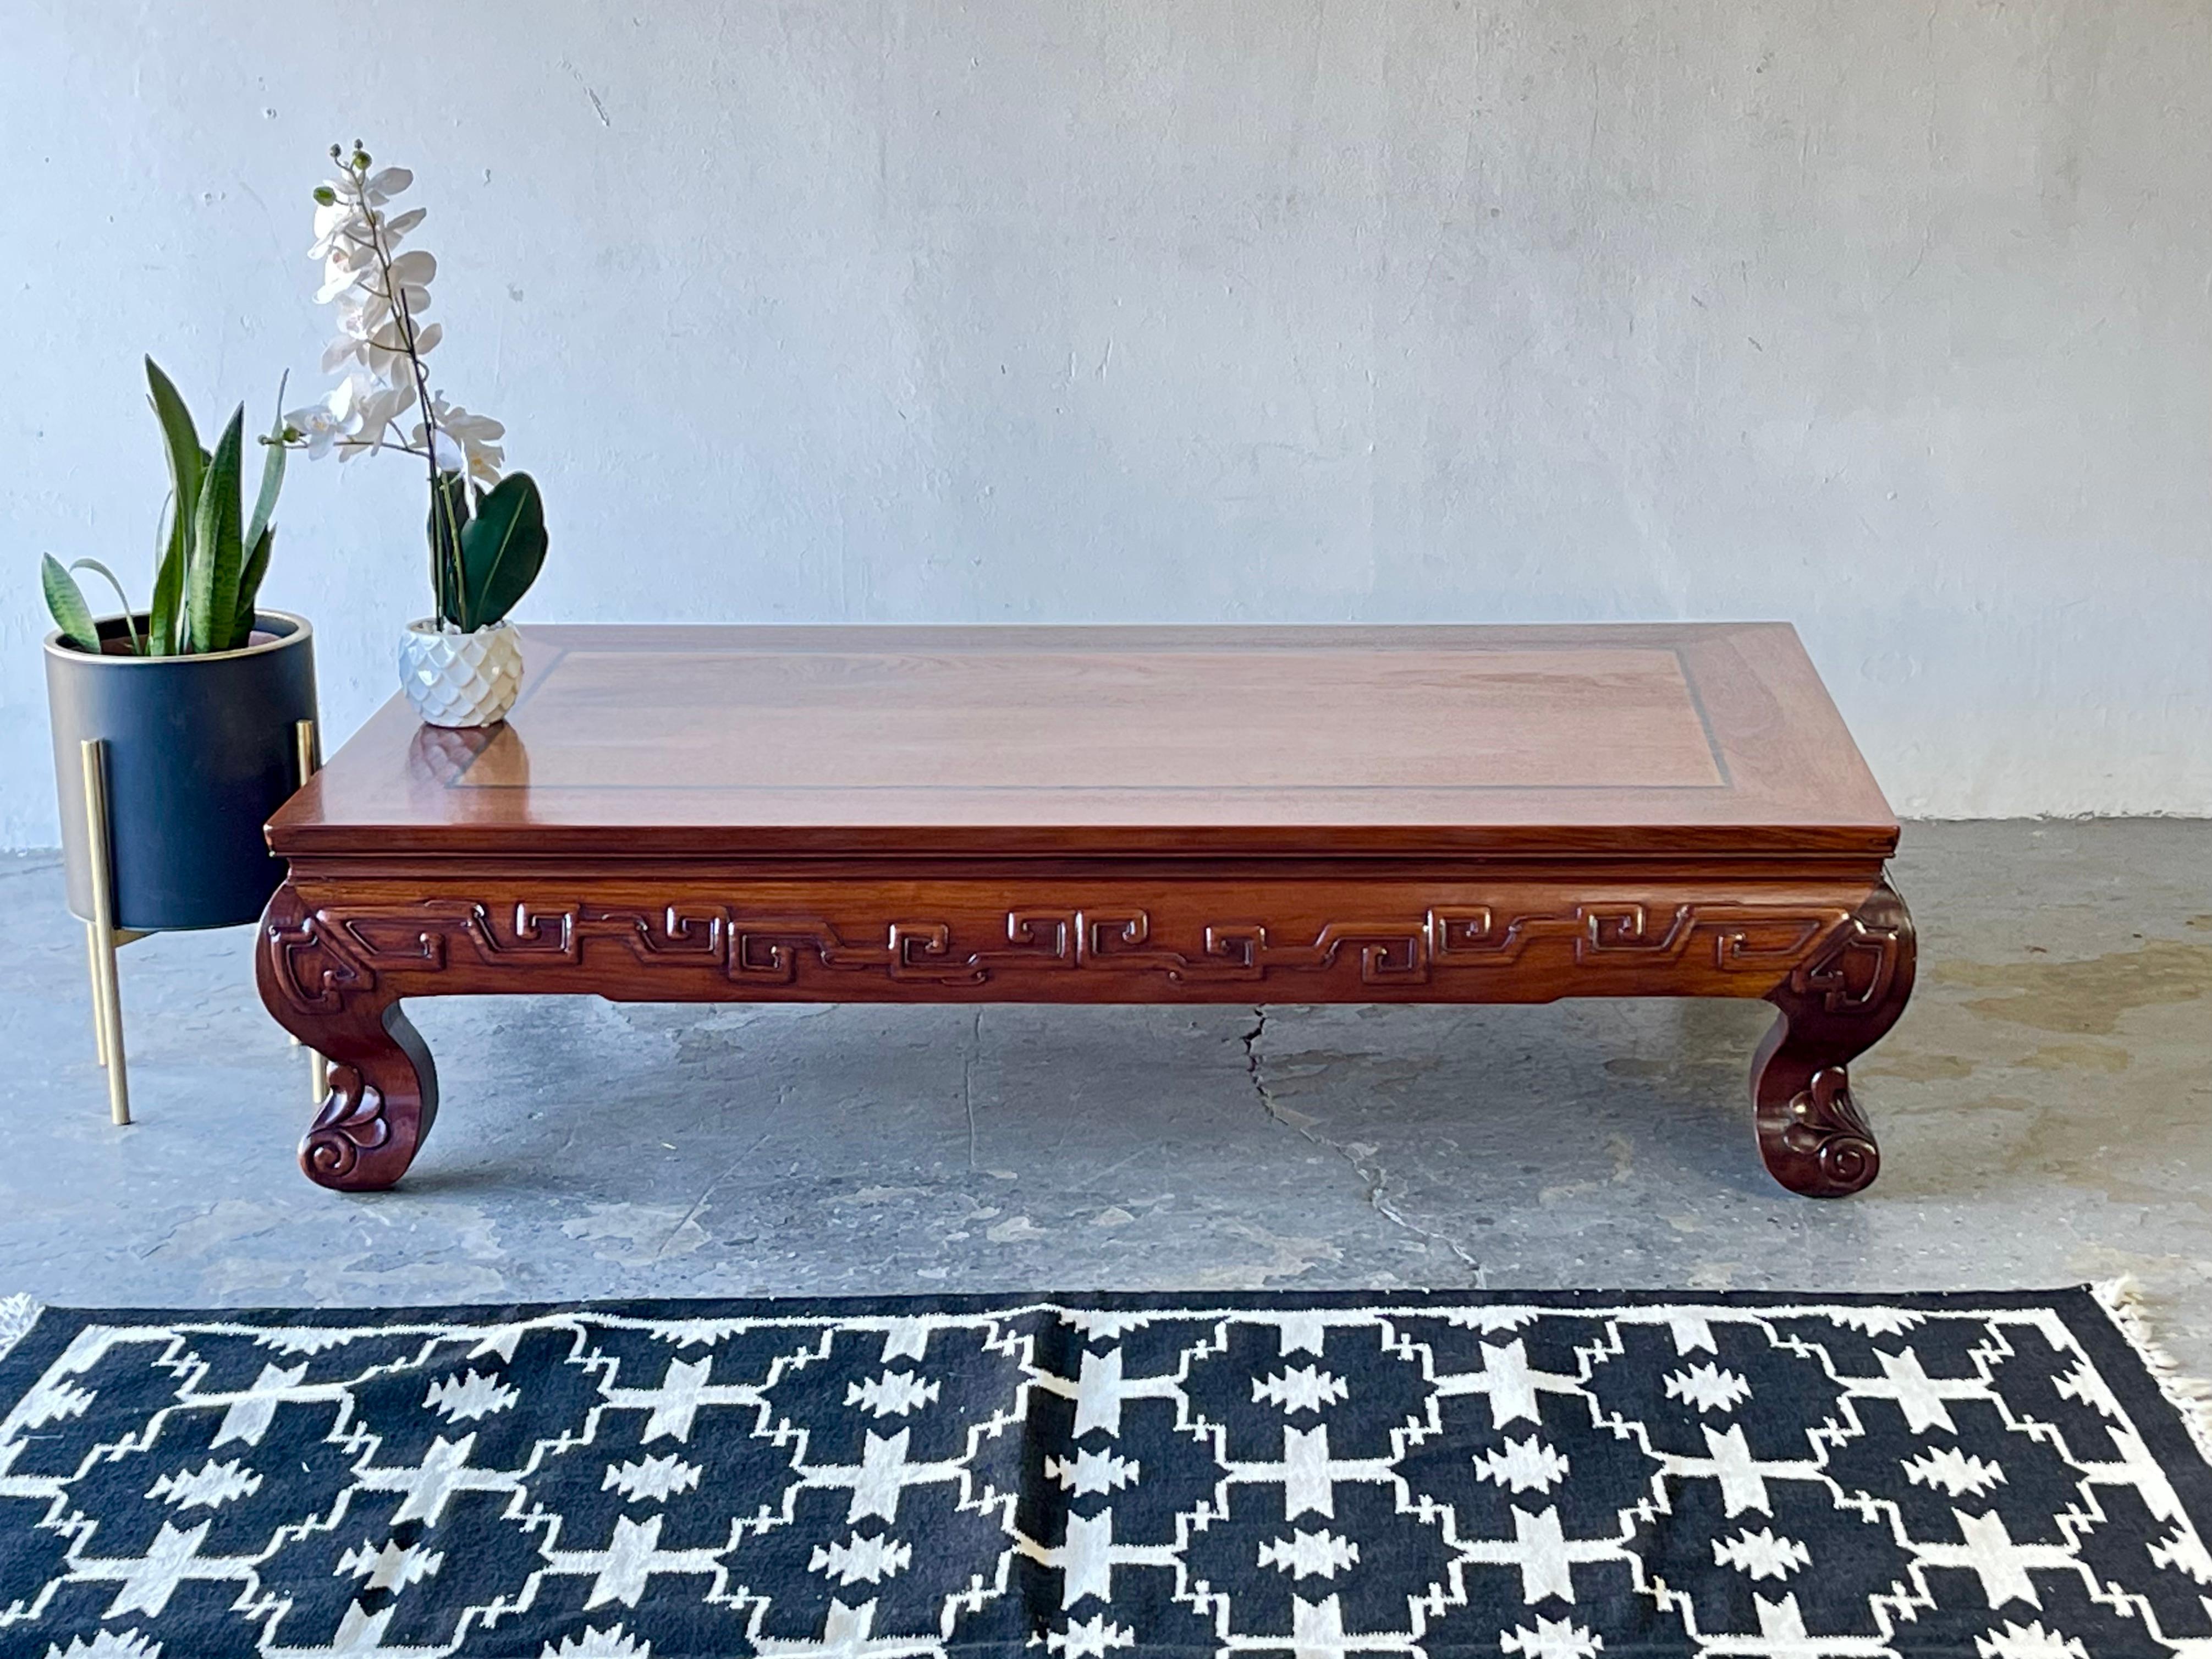 Stunning early to mid 1900’s hand carved Japanese solid Rosewood Zataku low table or coffee table. Table is inlaid with an ebony wood border. The hand carving is Elegant and beautiful. 

Zataku is the ce
nter of Japanese life, eating,